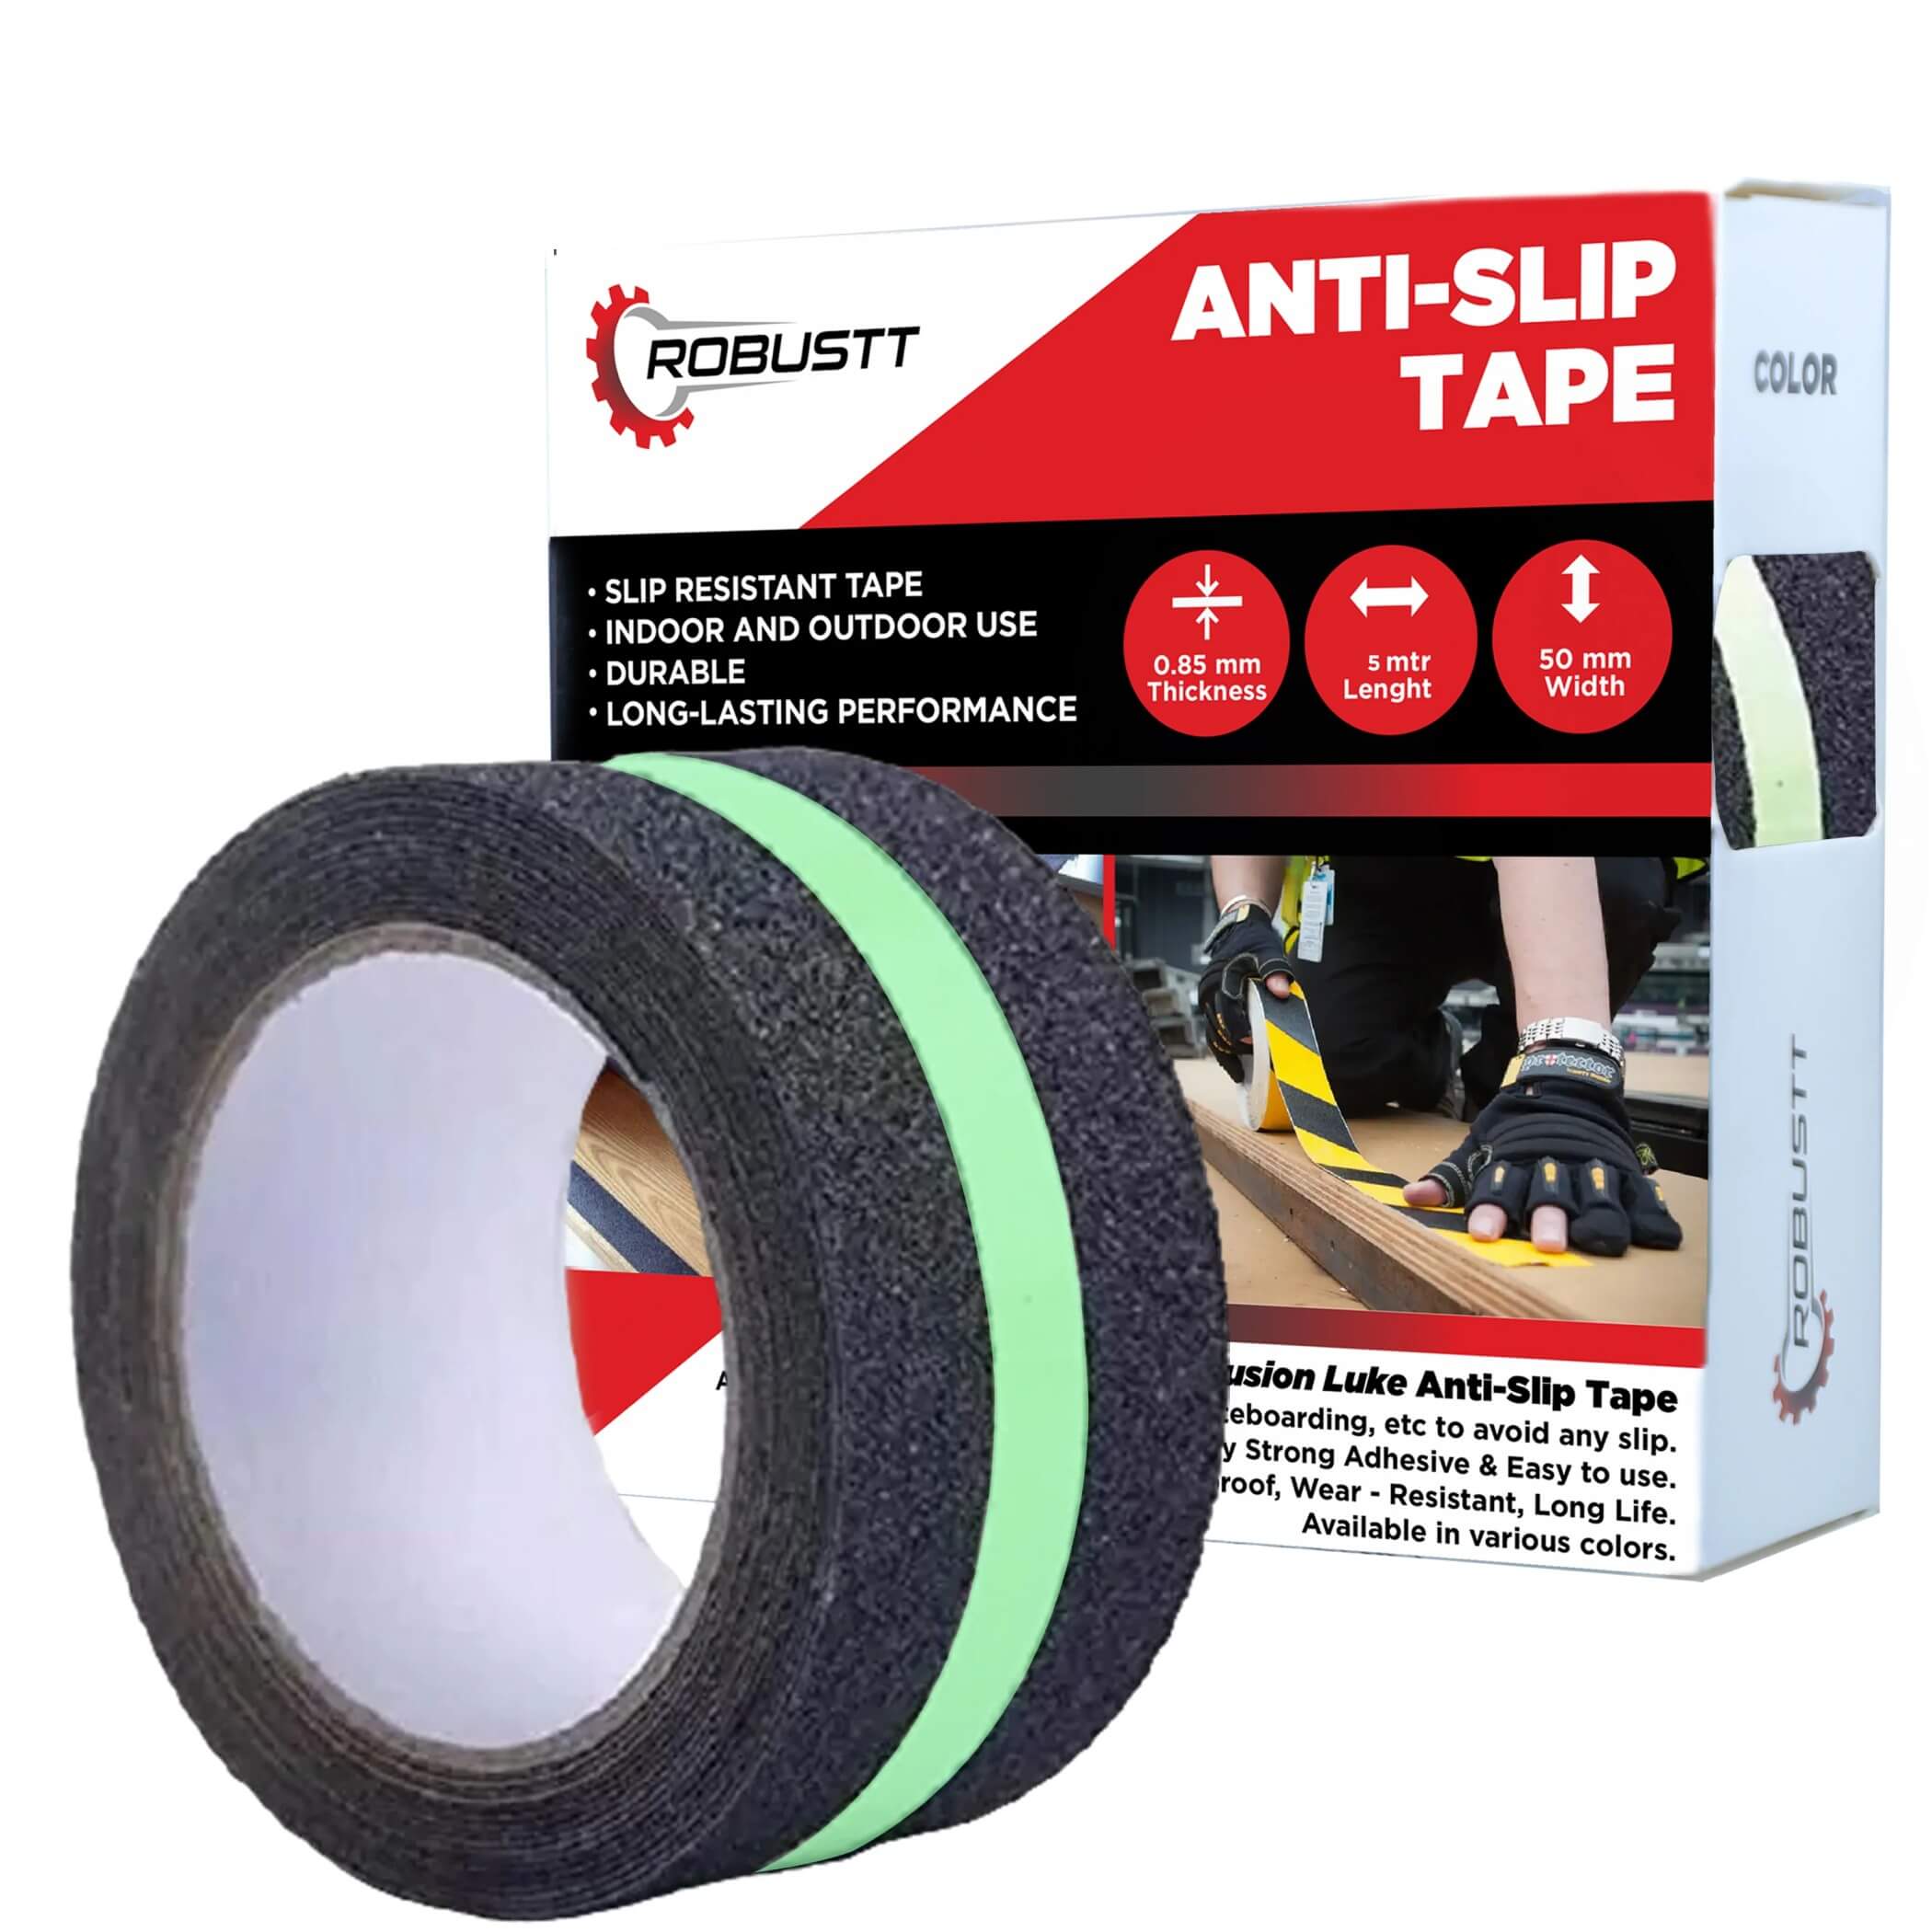 robustt-anti-skid-antislip-5mtr-guaranteed-x50mm-neon-fall-resistant-with-pet-material-and-solvent-acrylic-adhesive-tape-pack-of-1